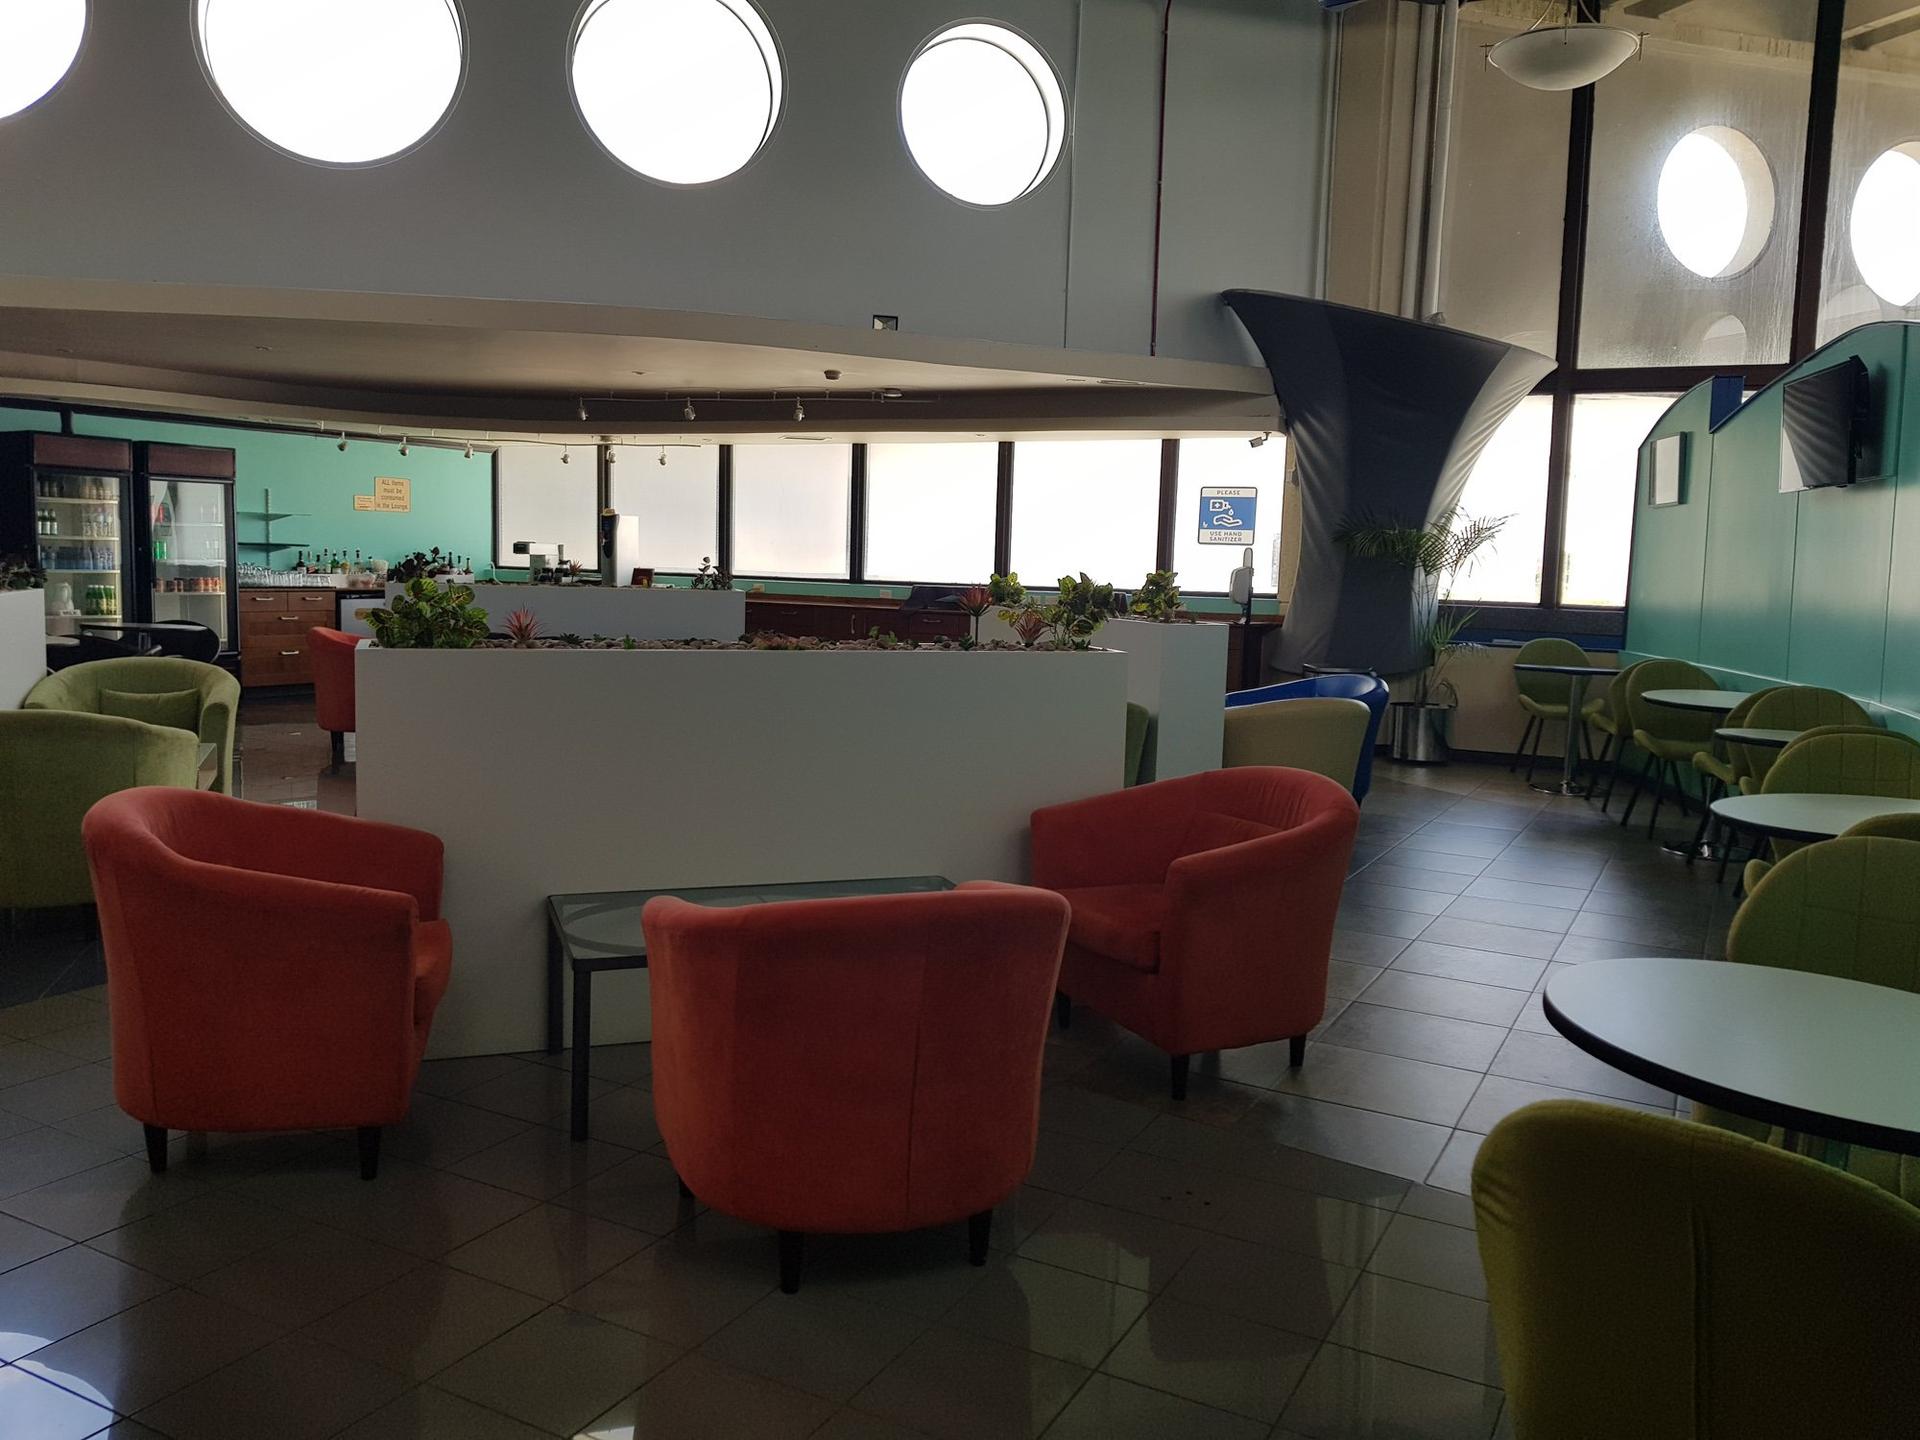 Airlines Executive Lounge image 2 of 18